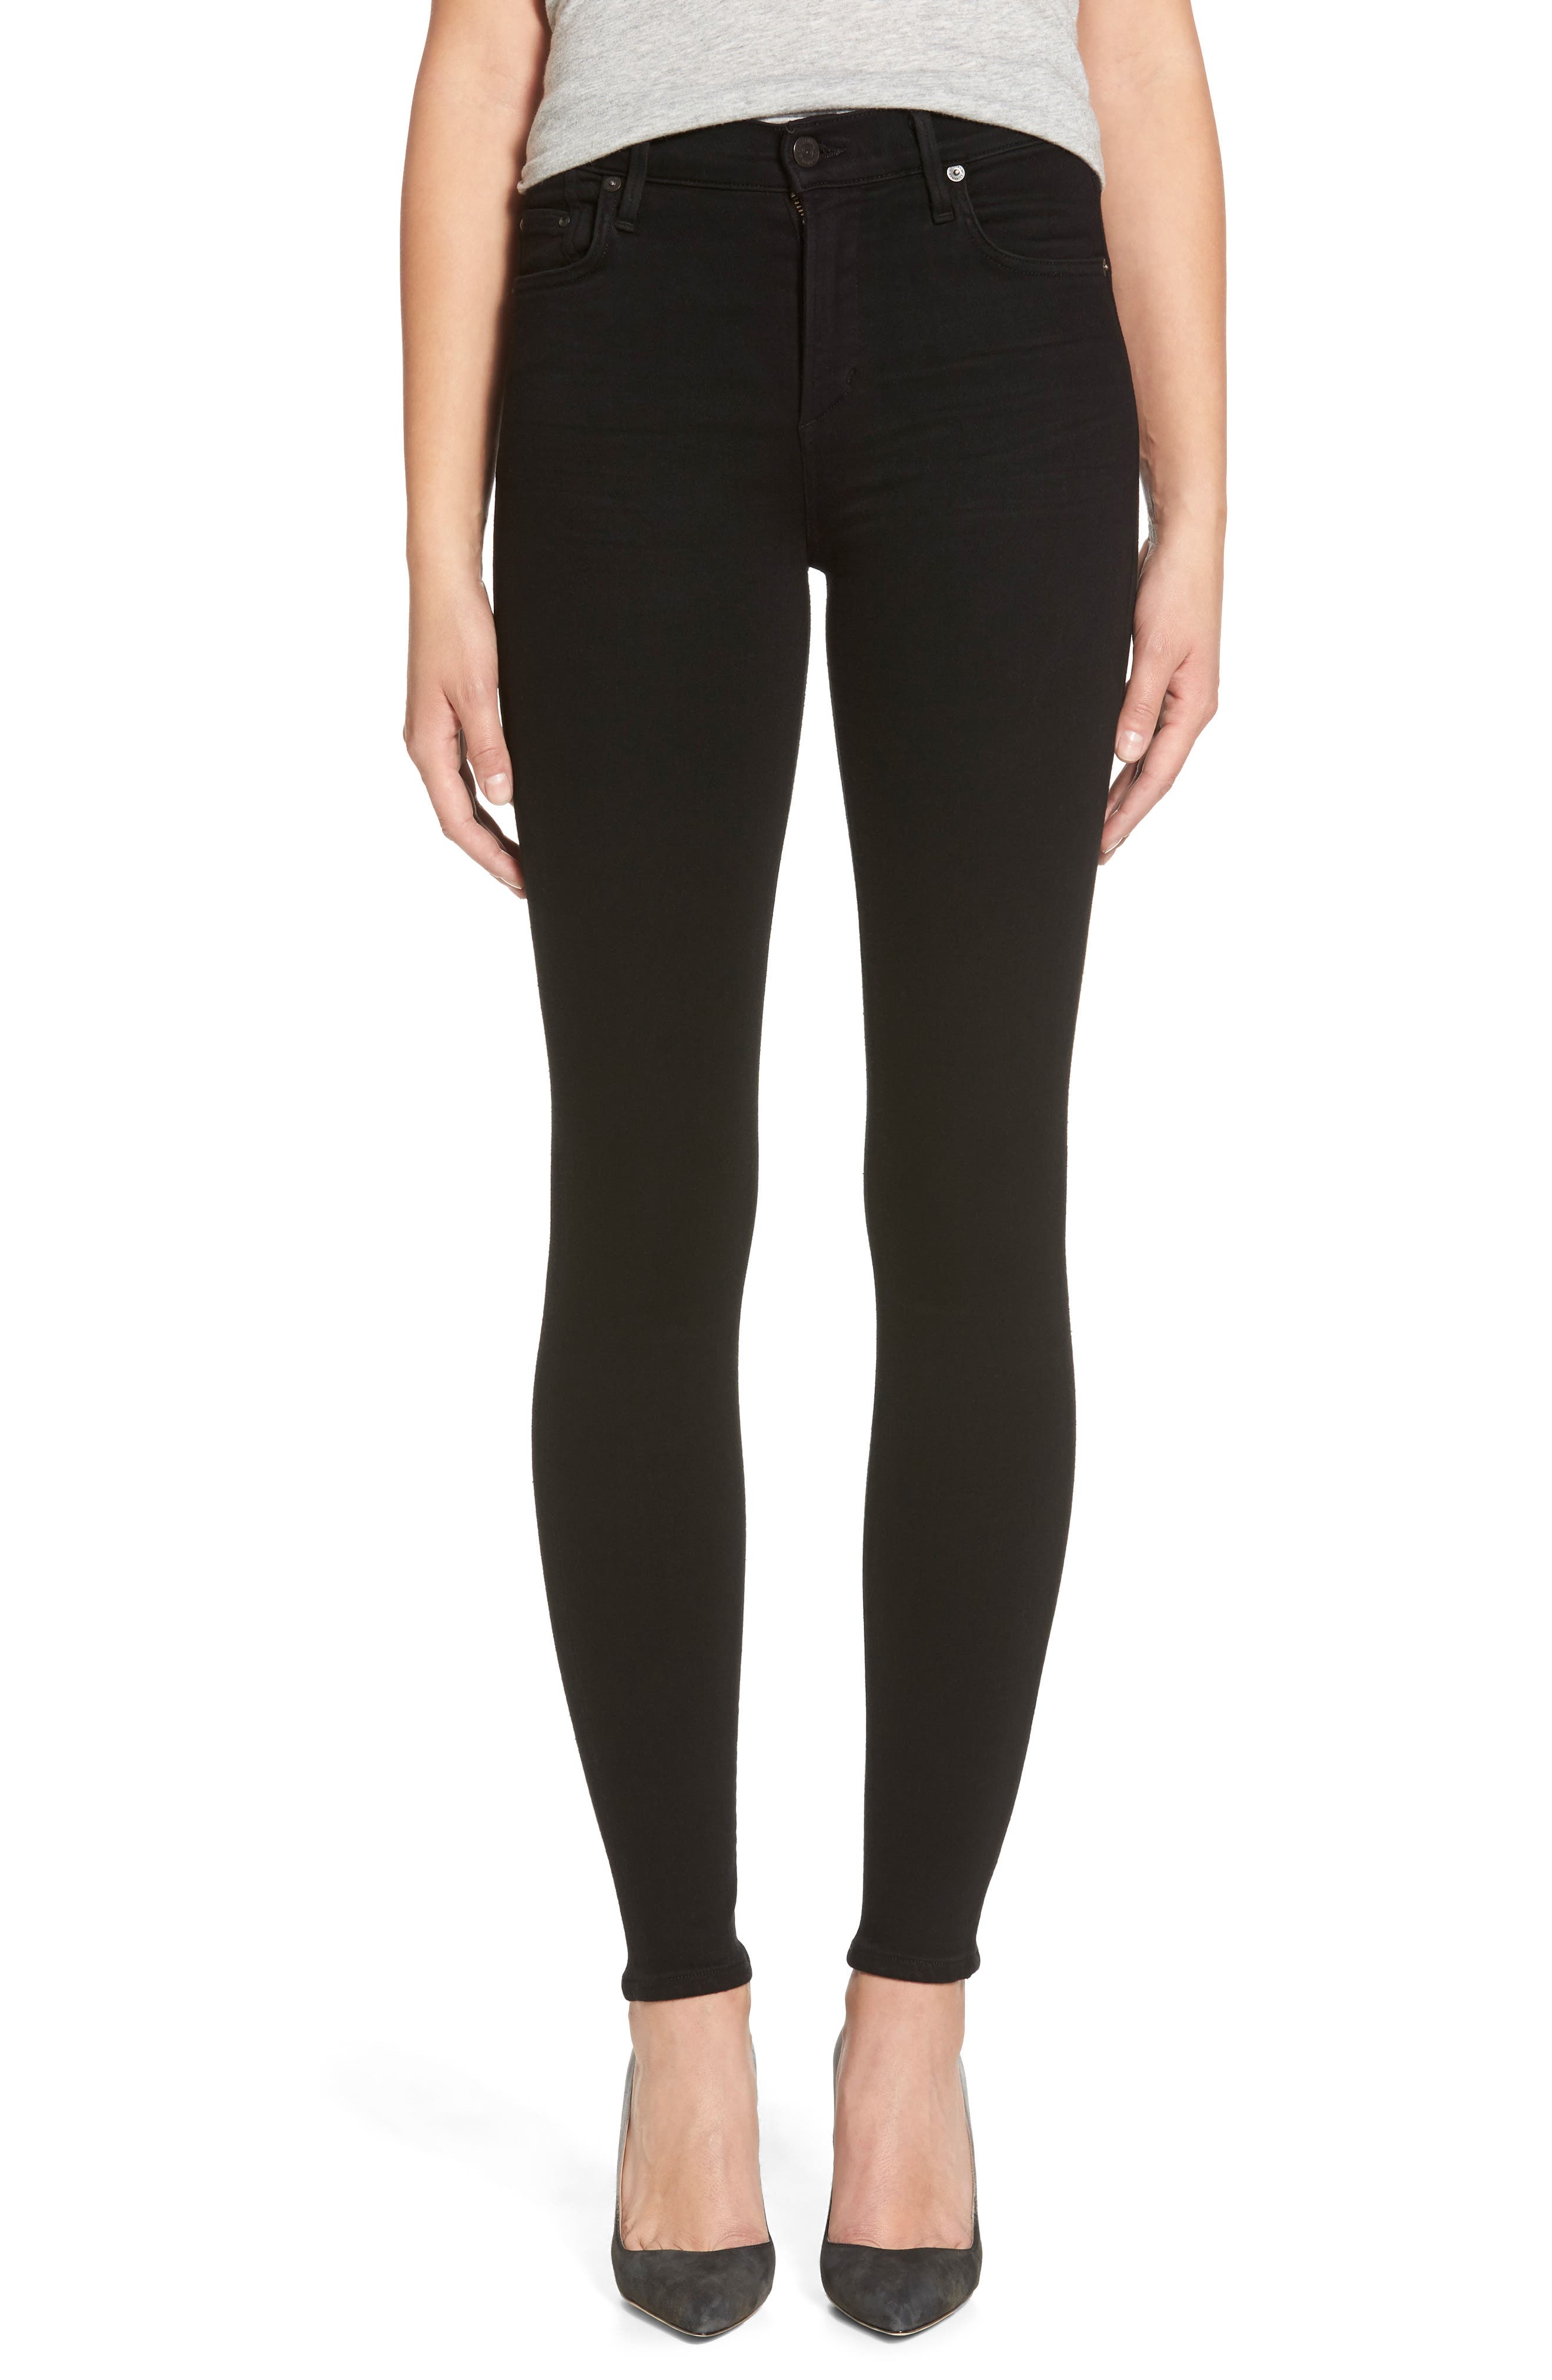 citizens of humanity black skinny jeans